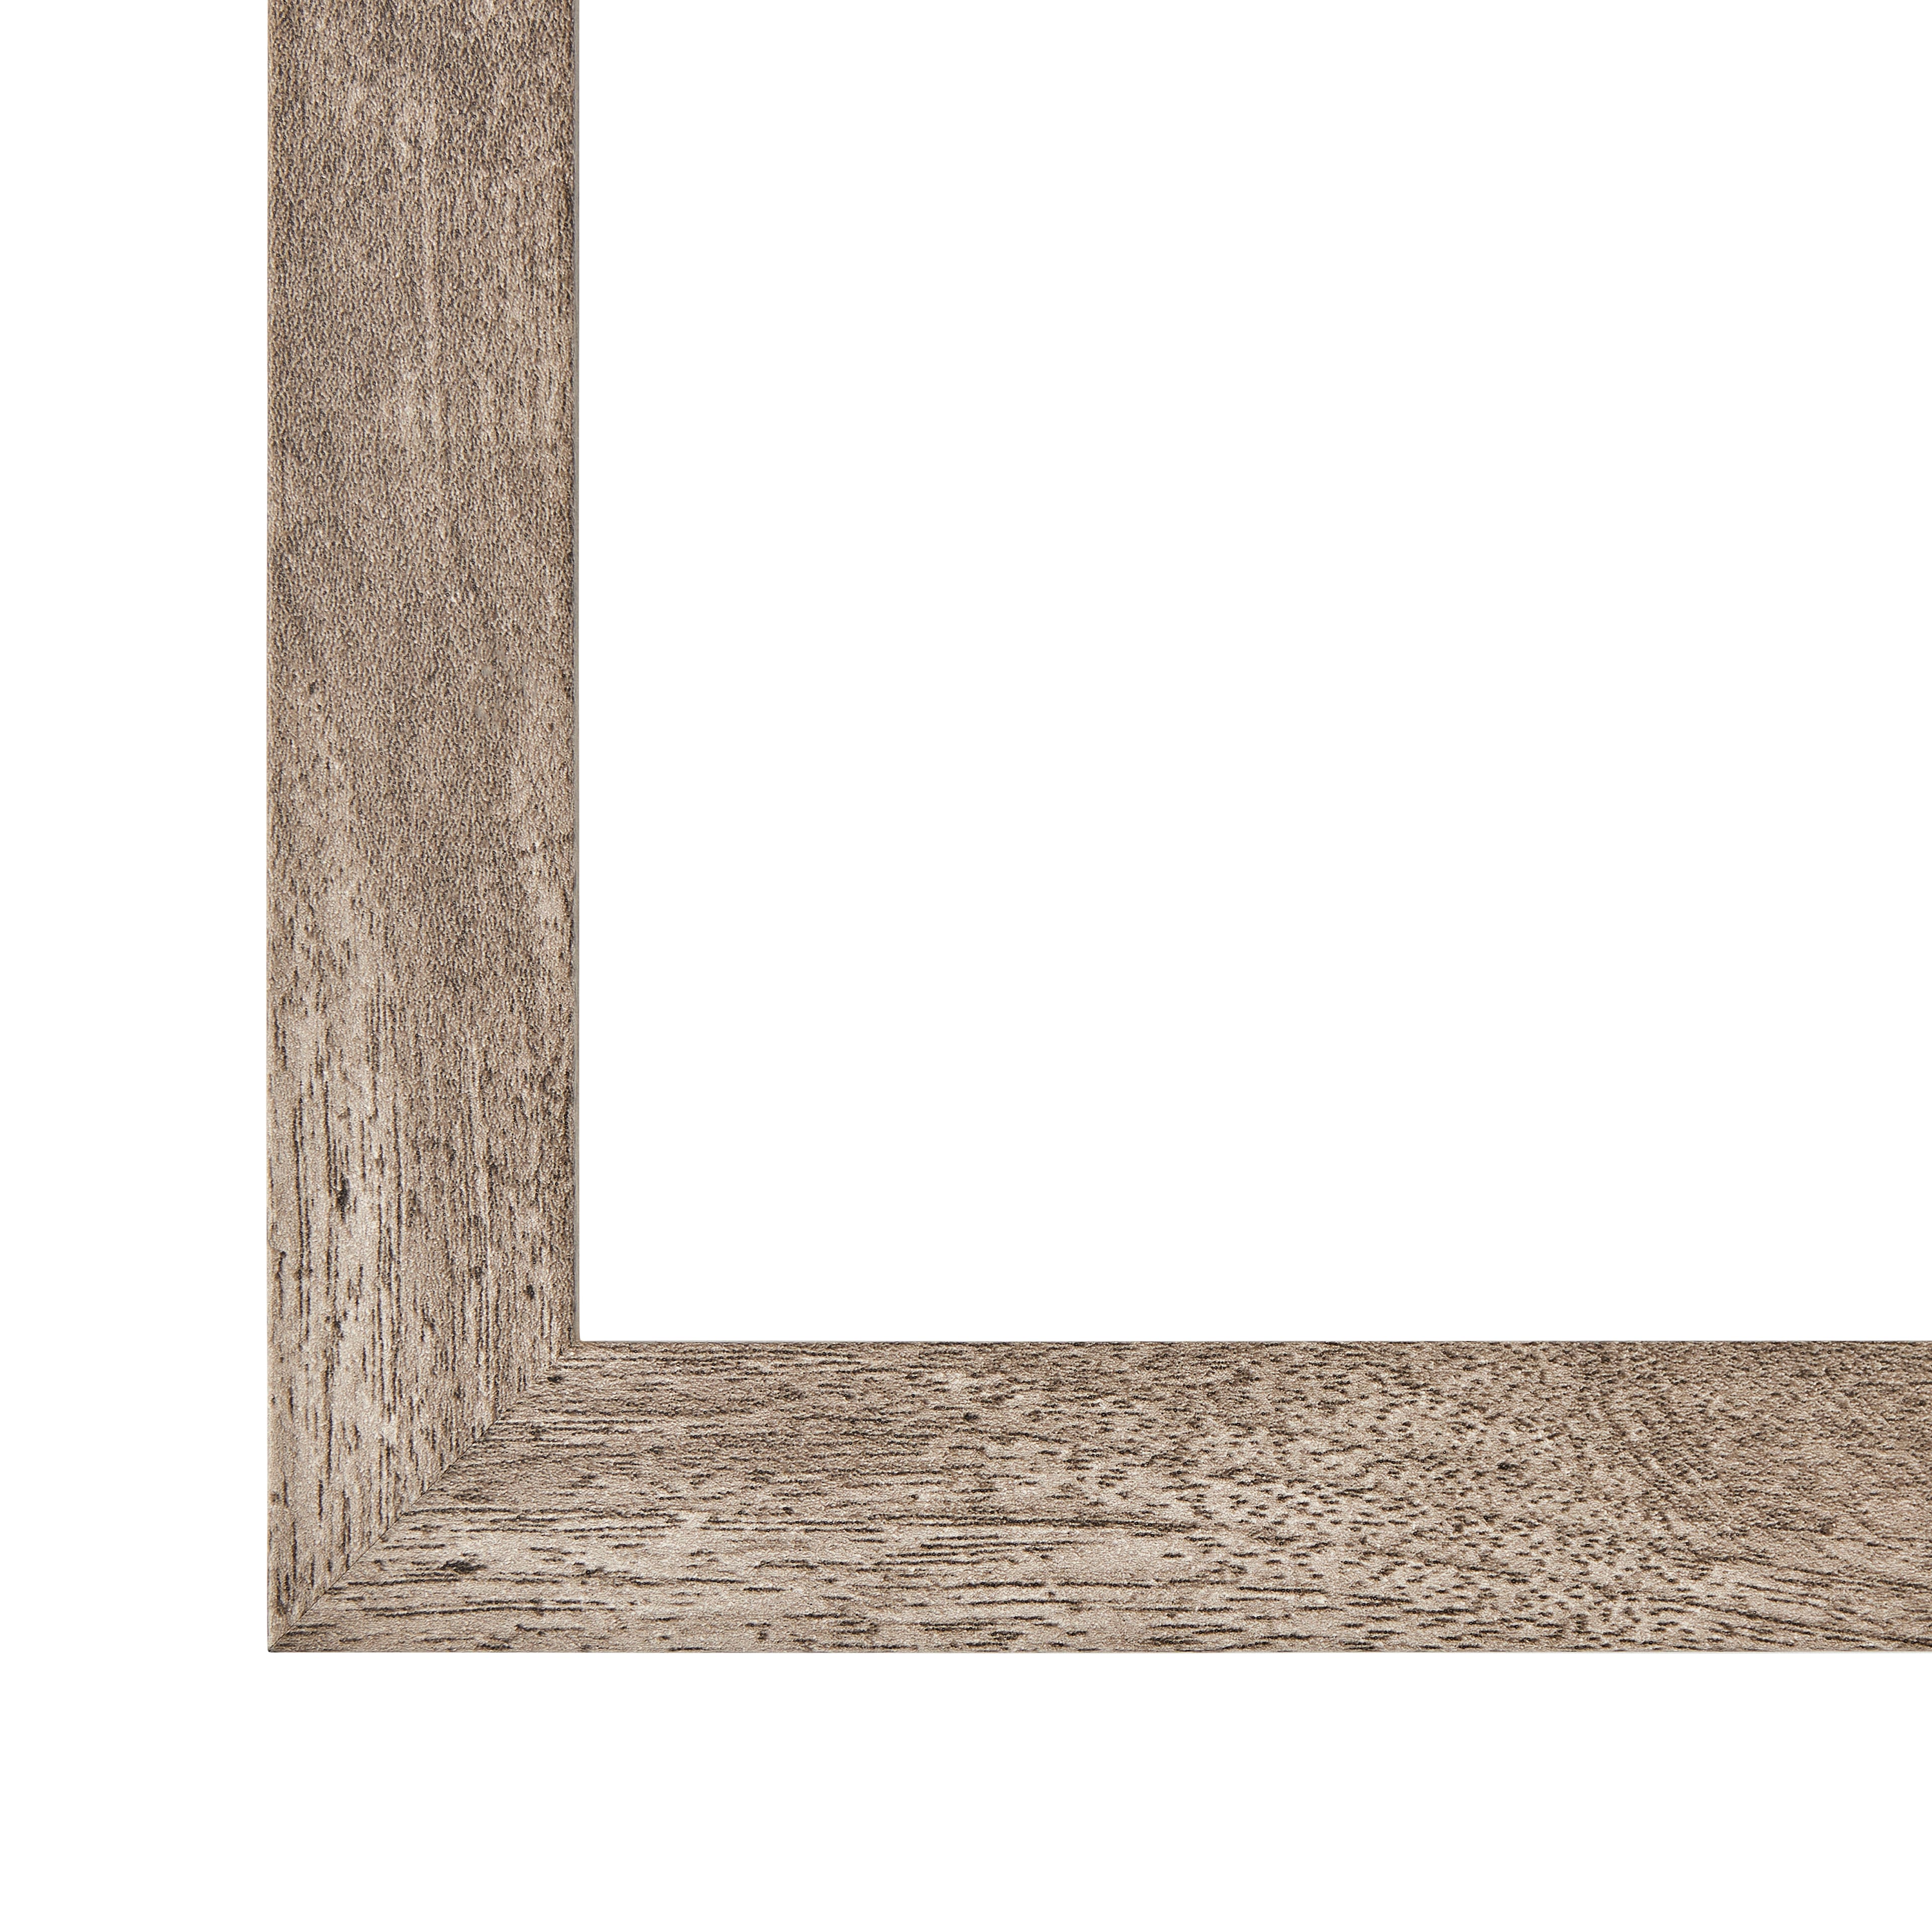 8 Pack: Gray Belmont Frame With Mat by Studio D&#xE9;cor&#xAE;